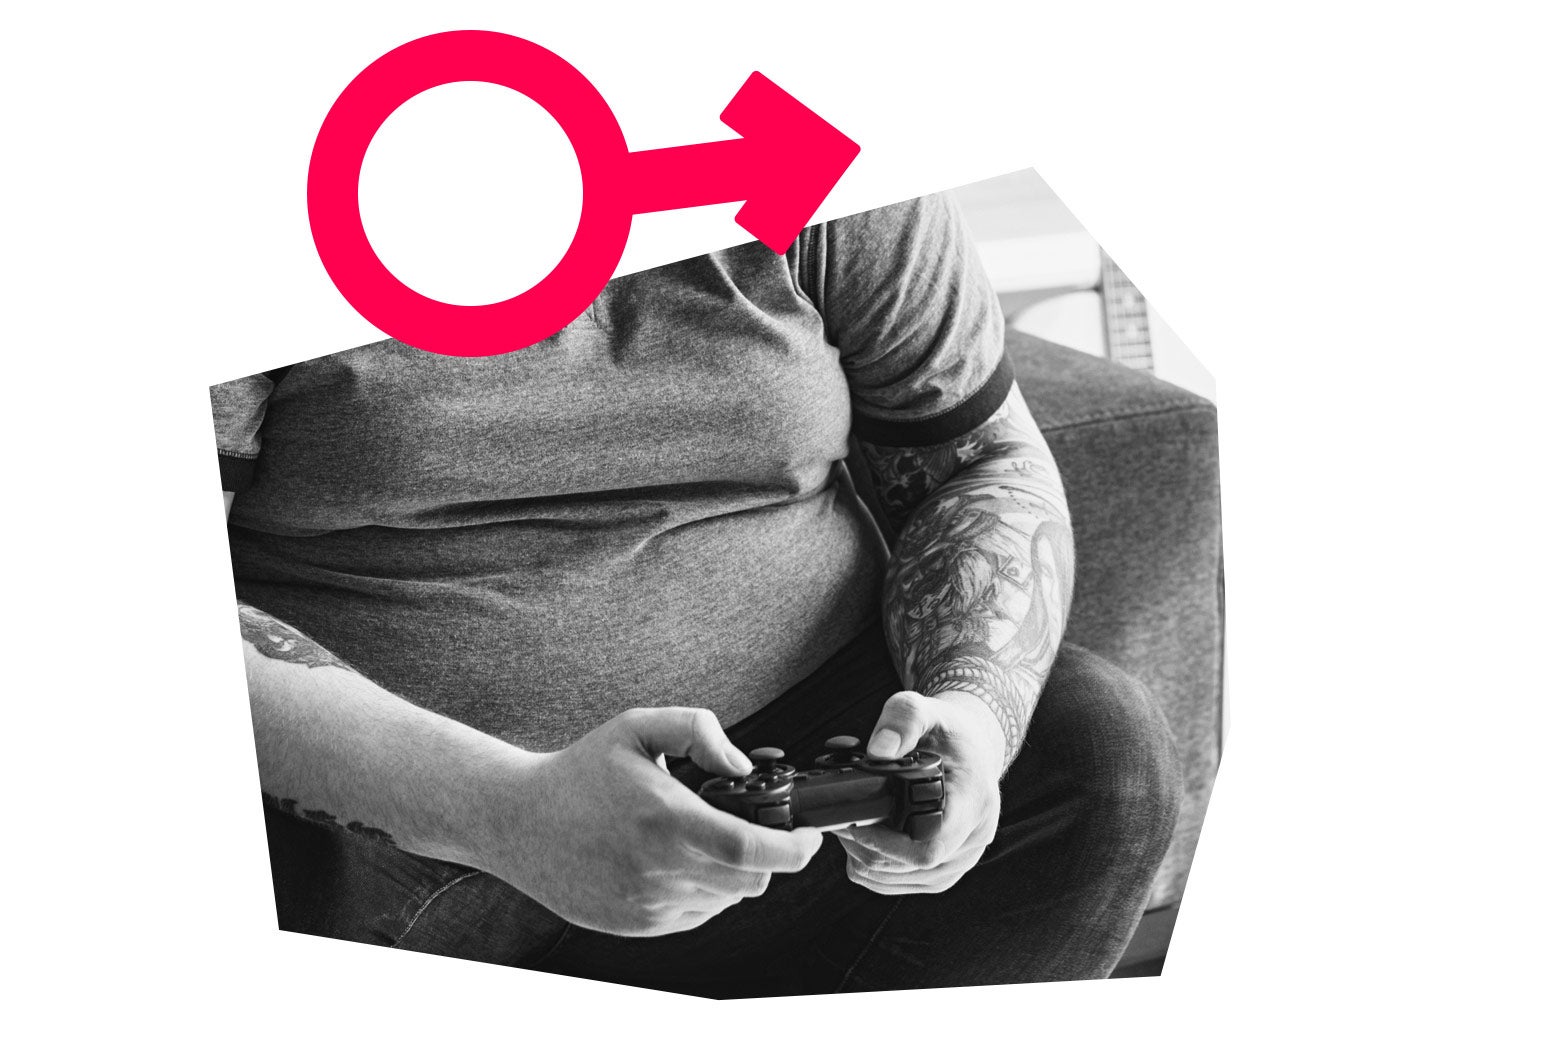 Person playing video games with the male symbol next to them.